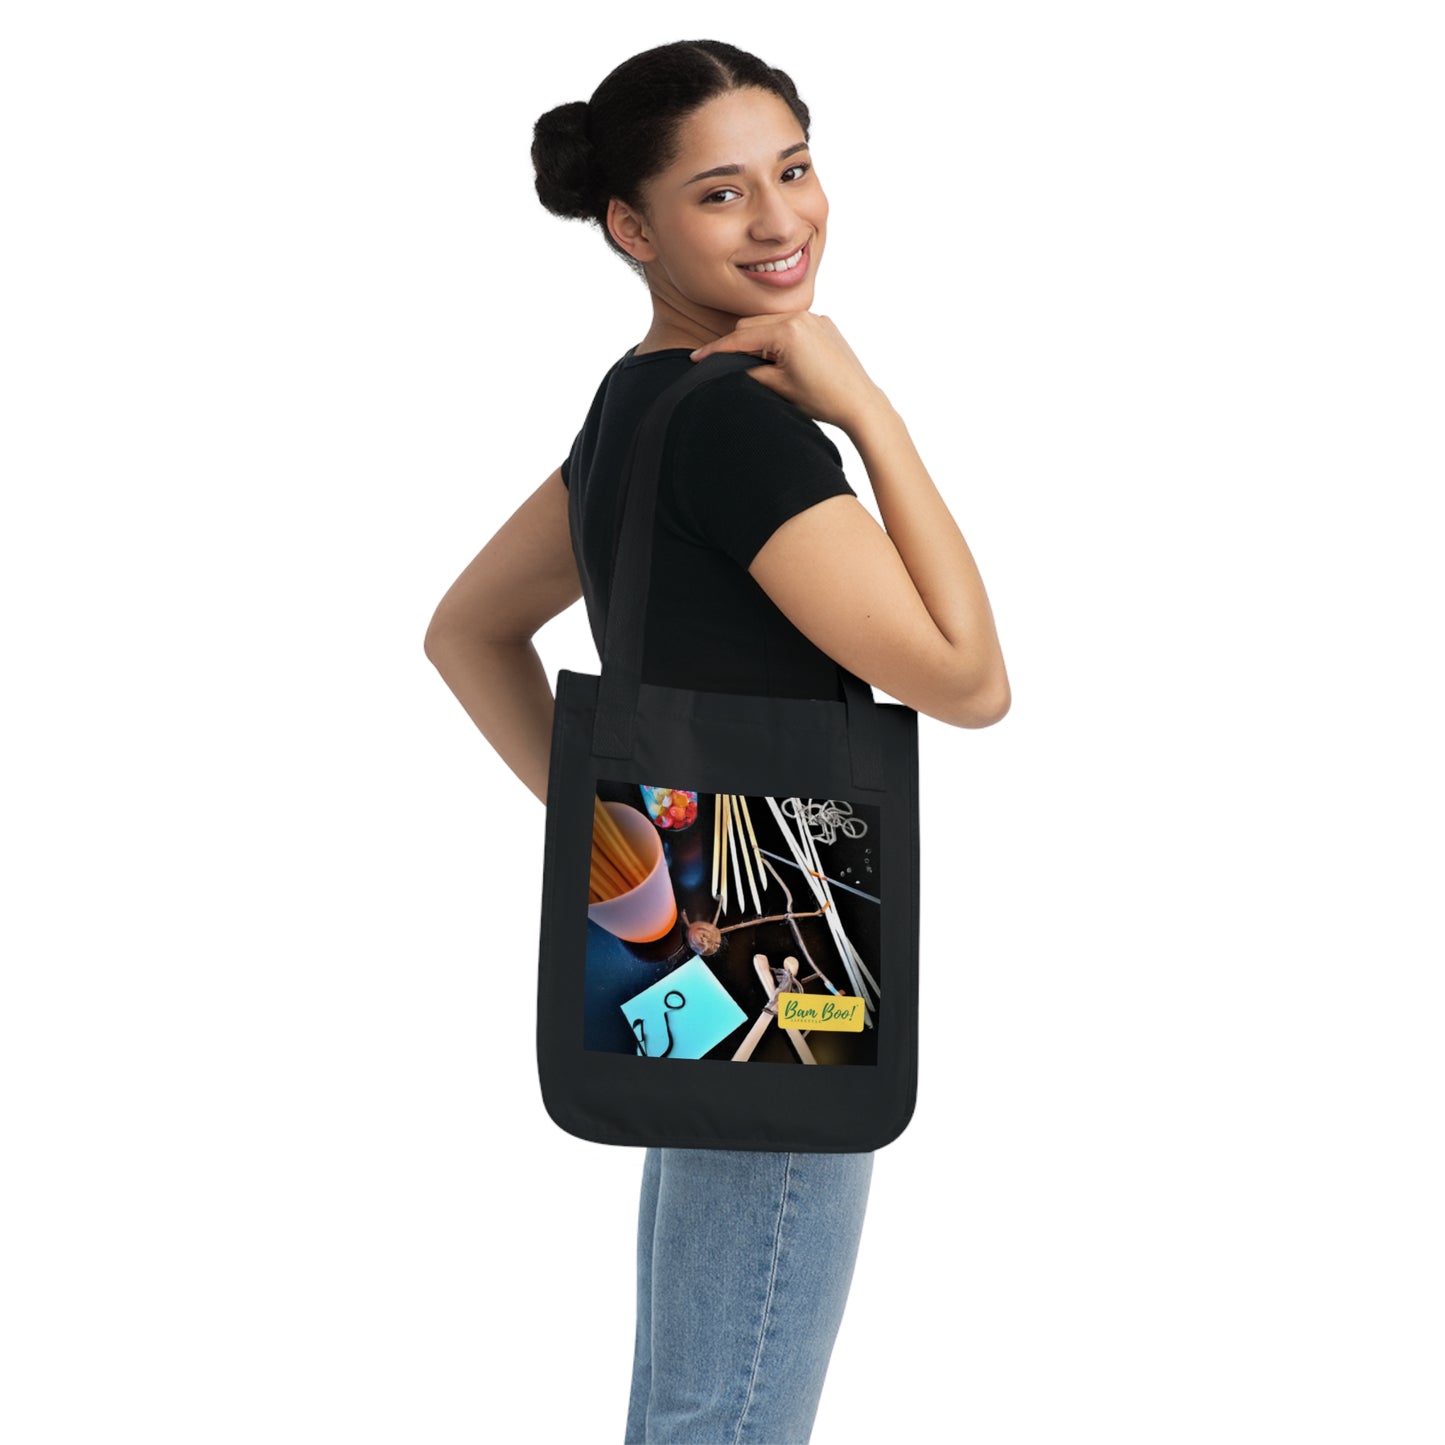 "Portrait Of Me: A 3D Self-Expression Through Found Objects" - Bam Boo! Lifestyle Eco-friendly Tote Bag